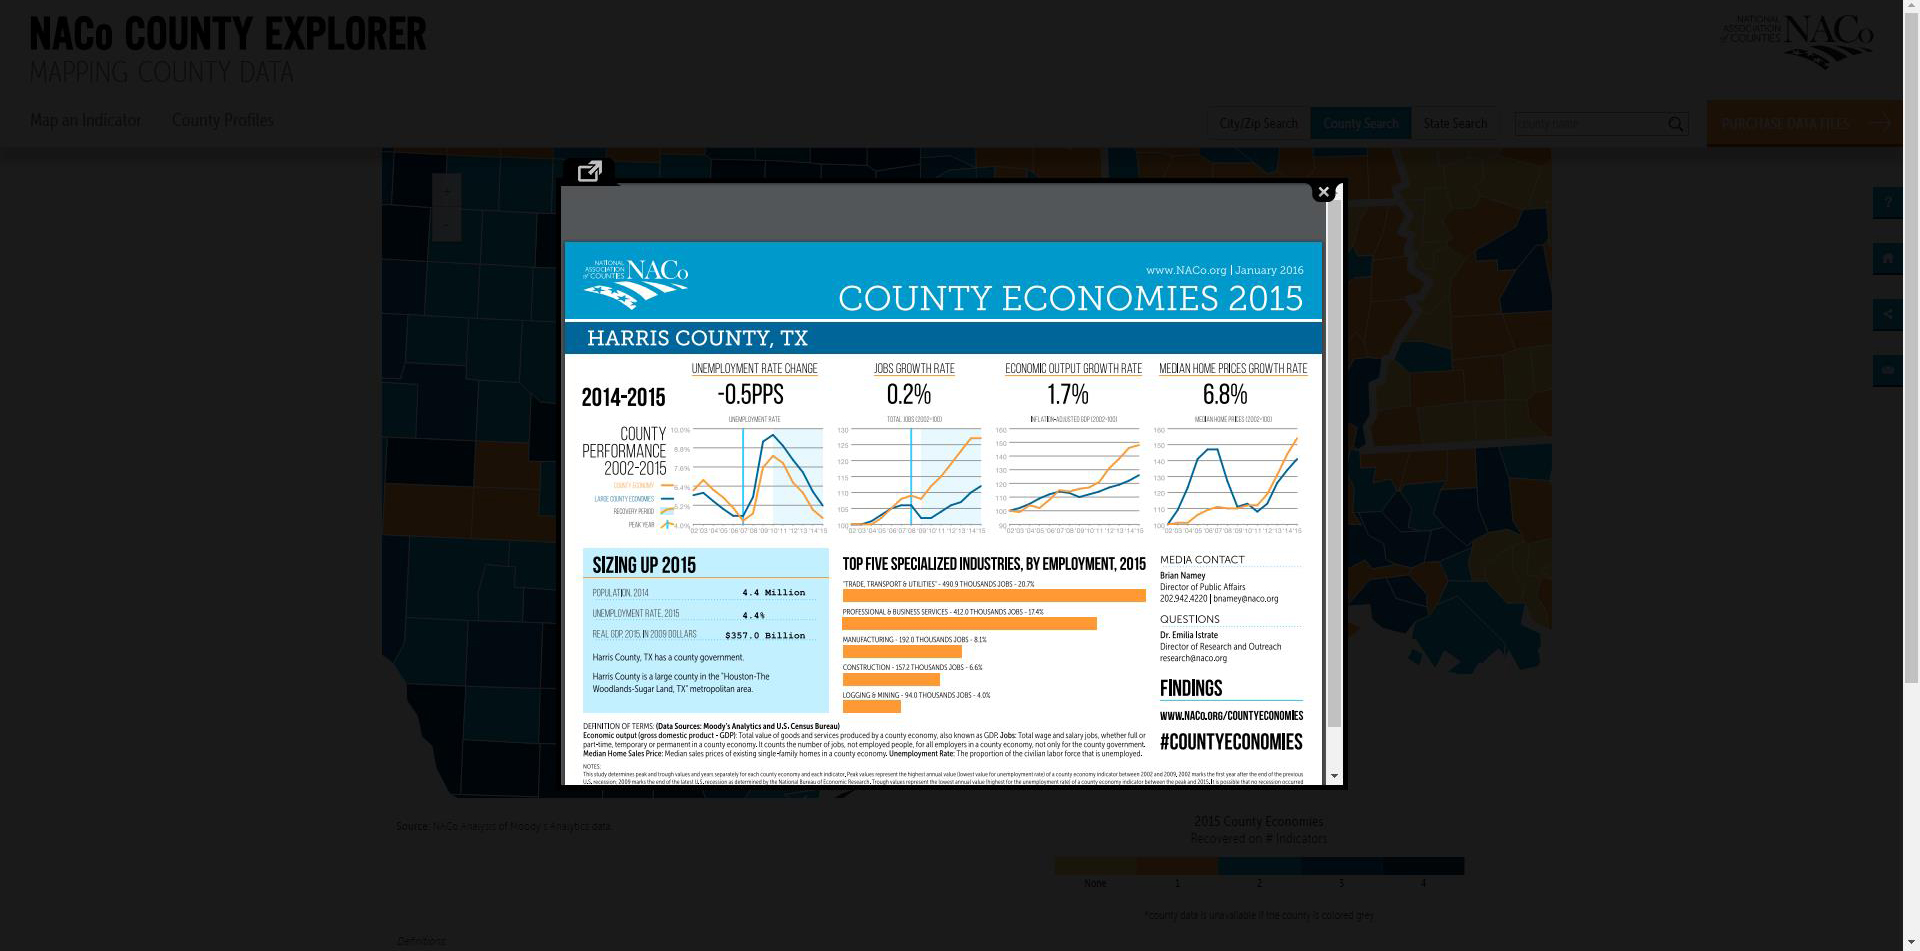 A screenshot of the tool, NACo County Explorer, being used.